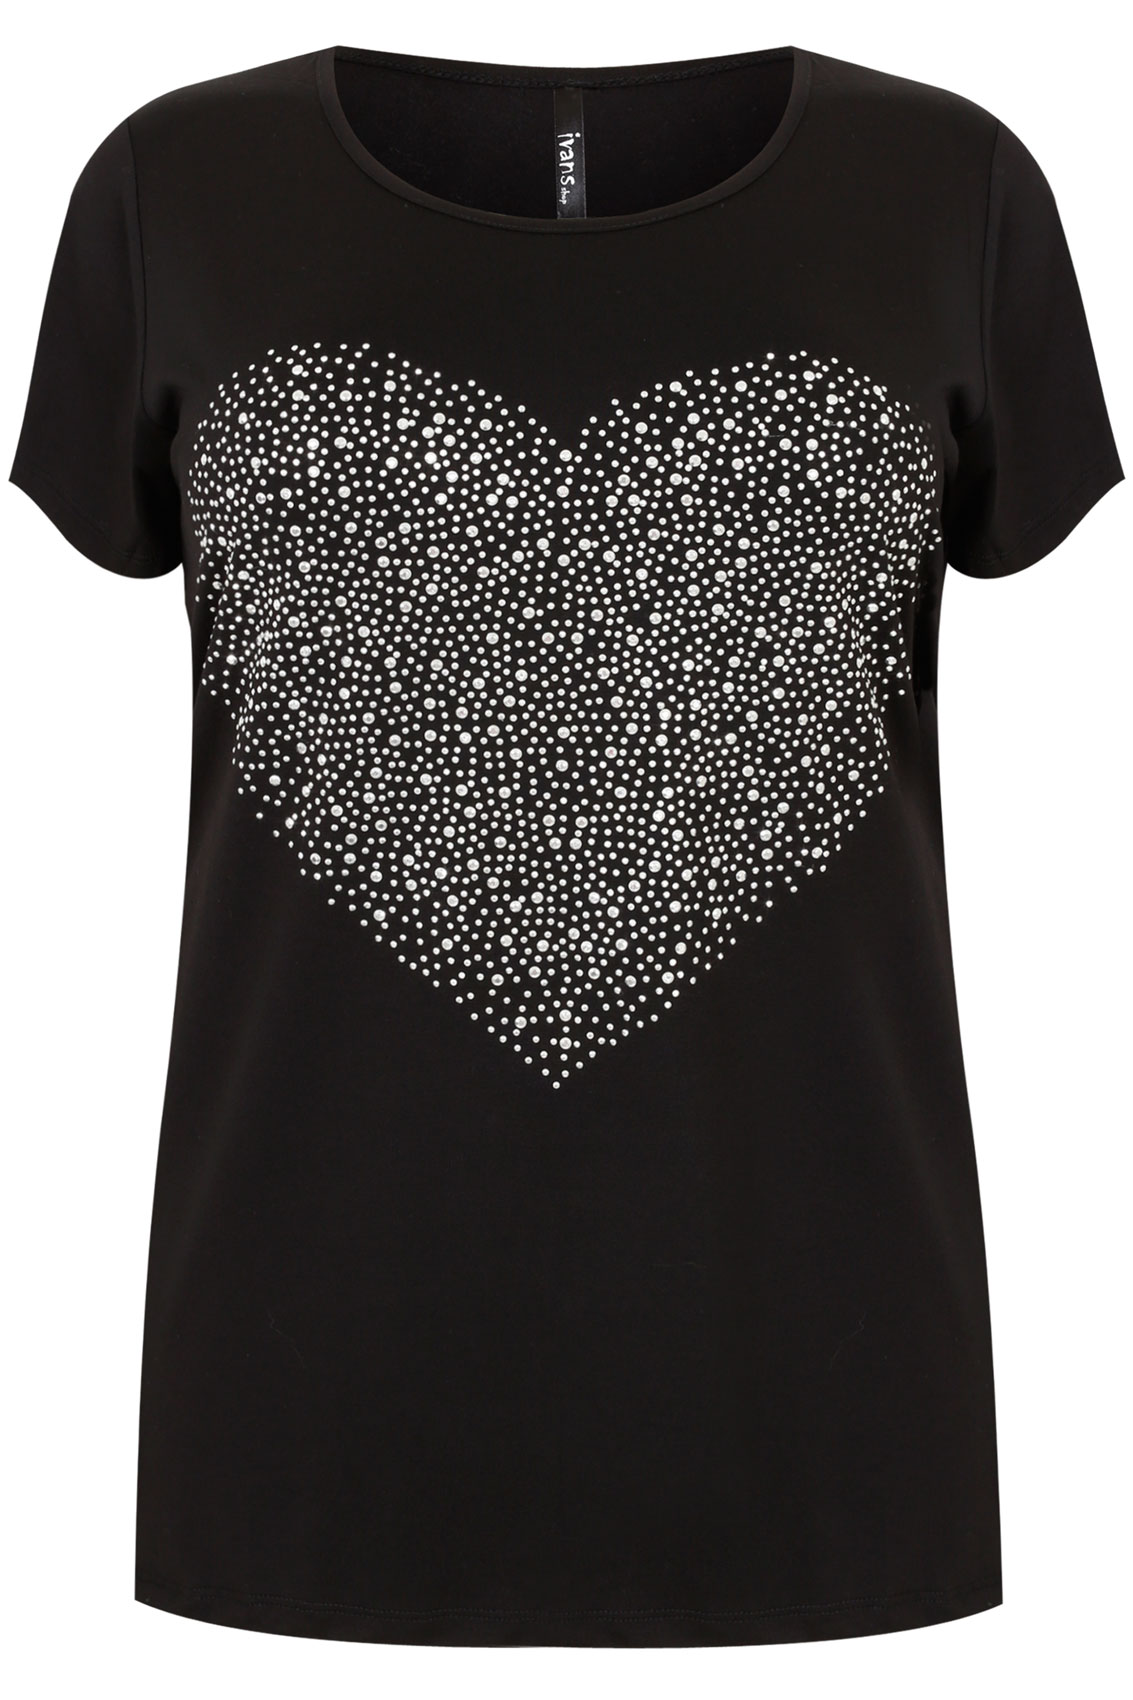 Black Short Sleeve T-Shirt With Heart Embellishment, Plus size 16 to 32